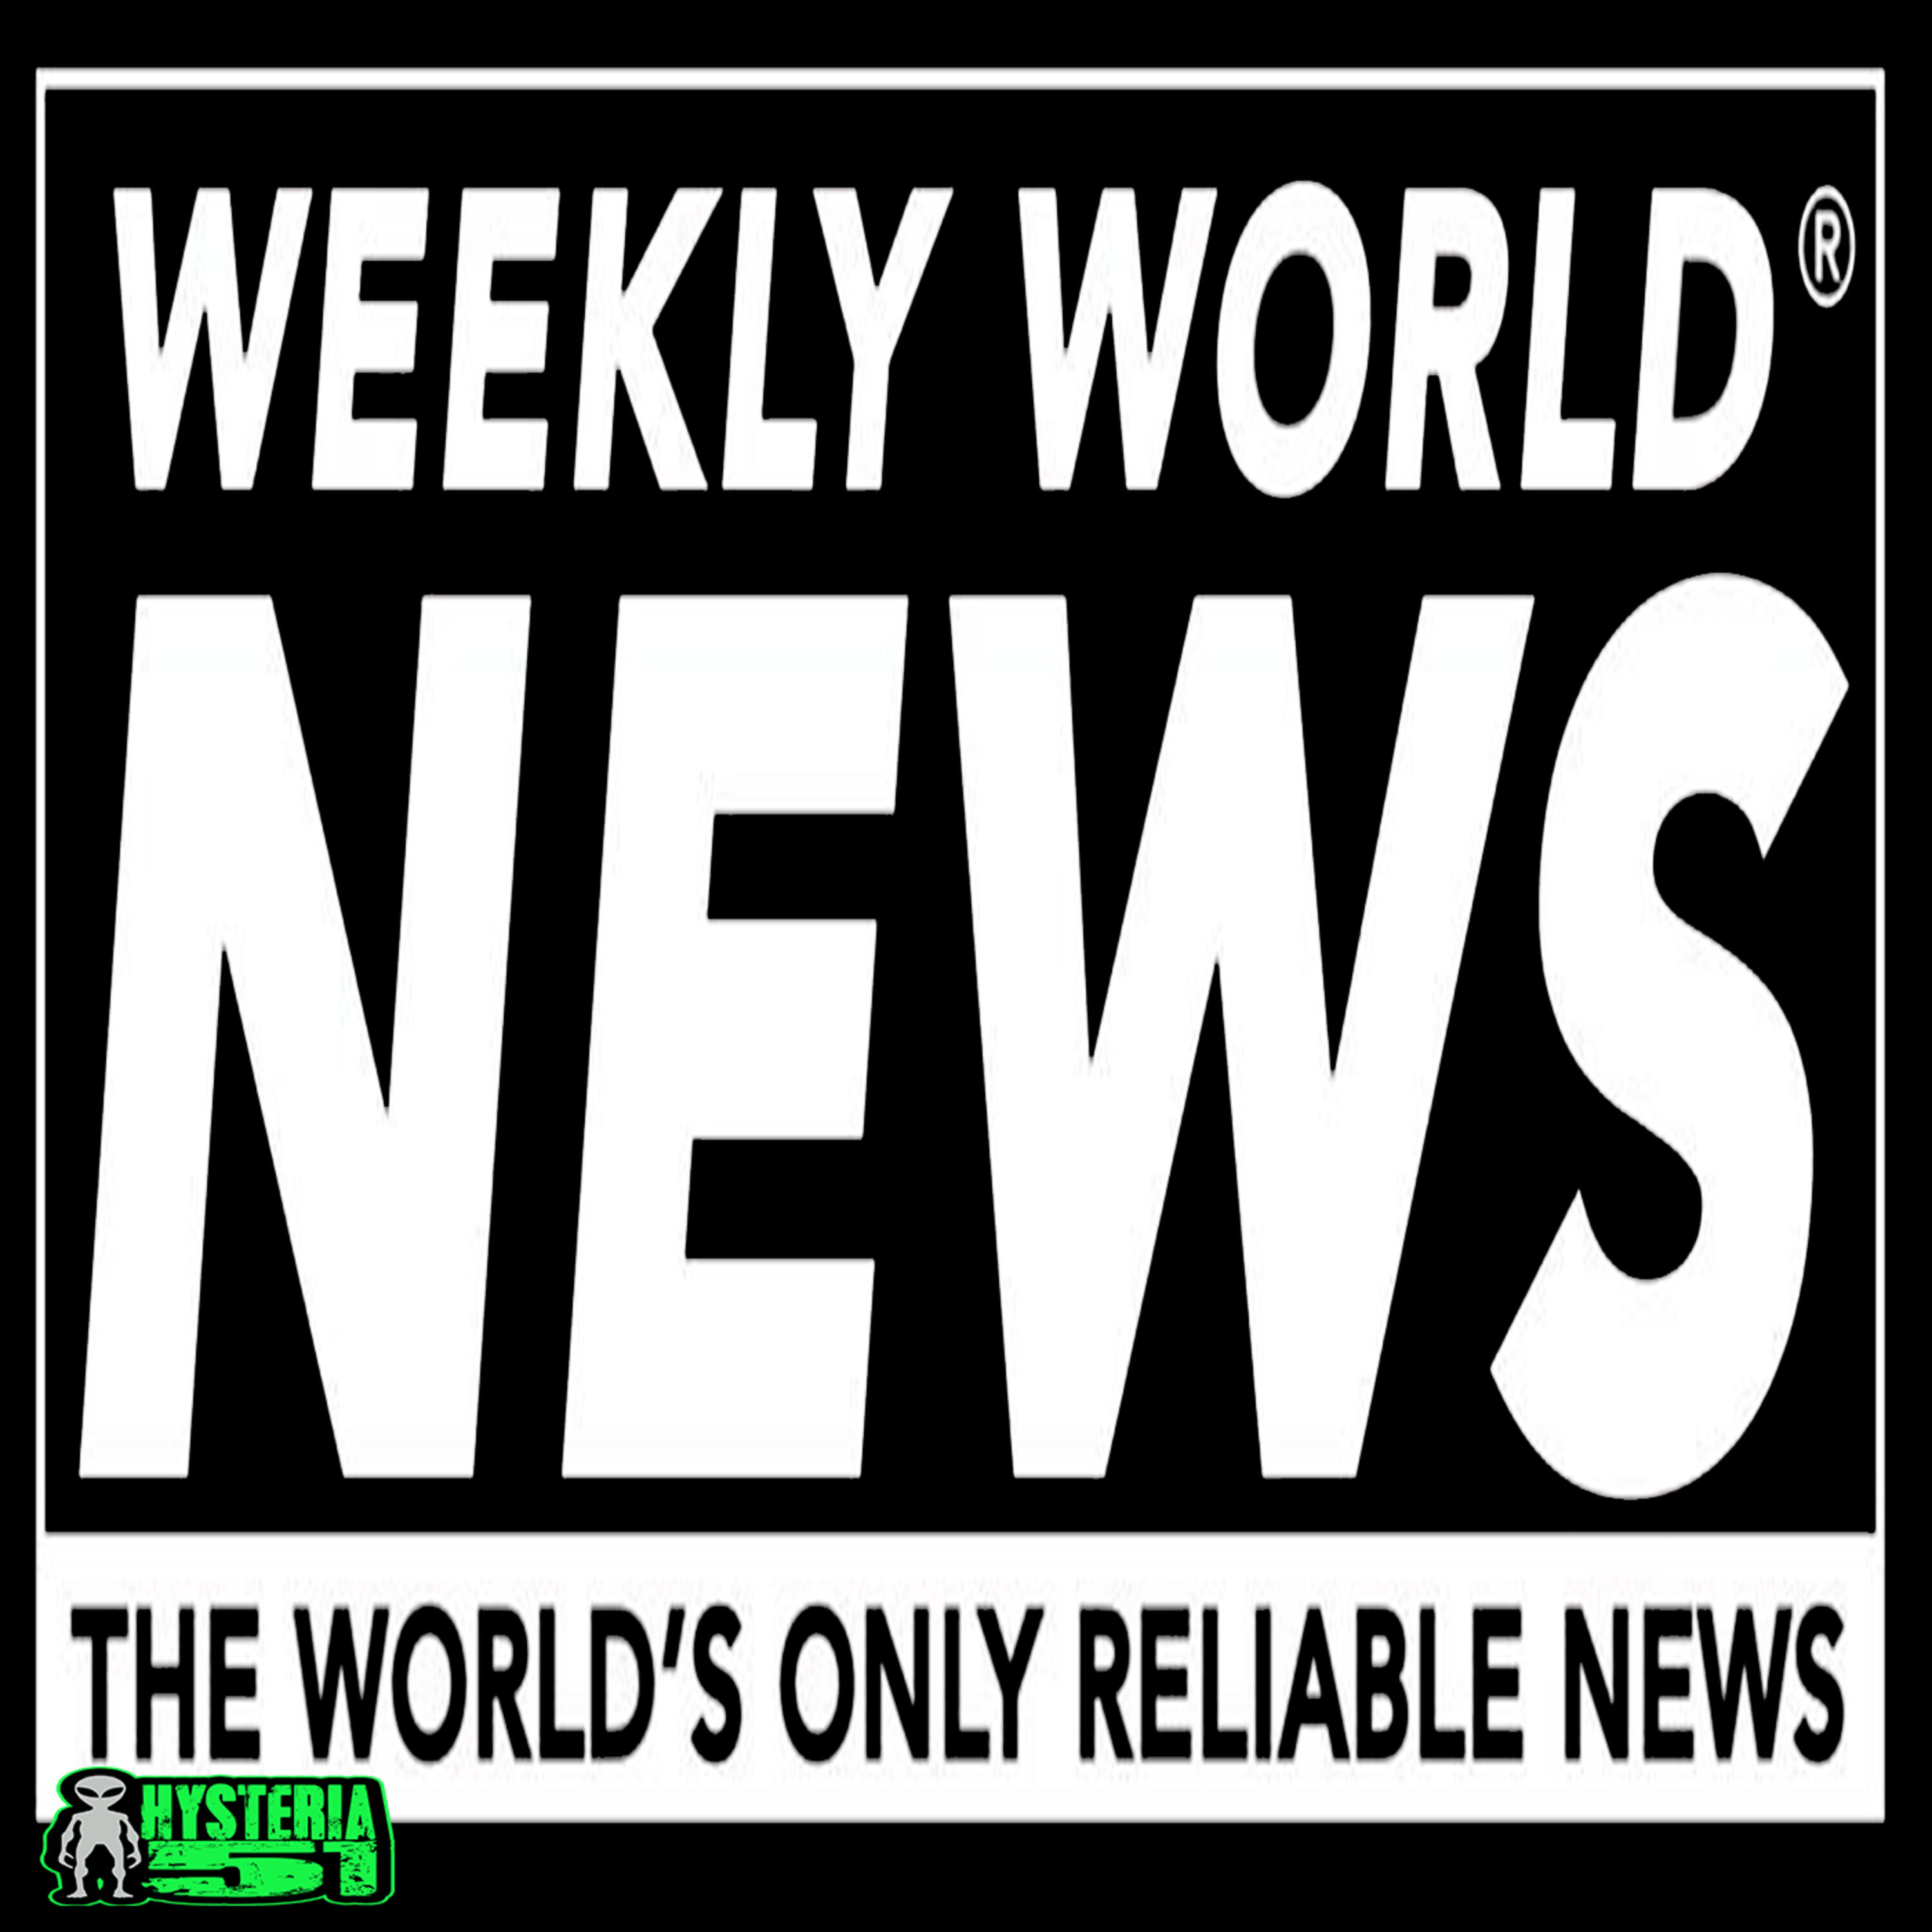 Weekly World News with Greg D’Alessandro | 259